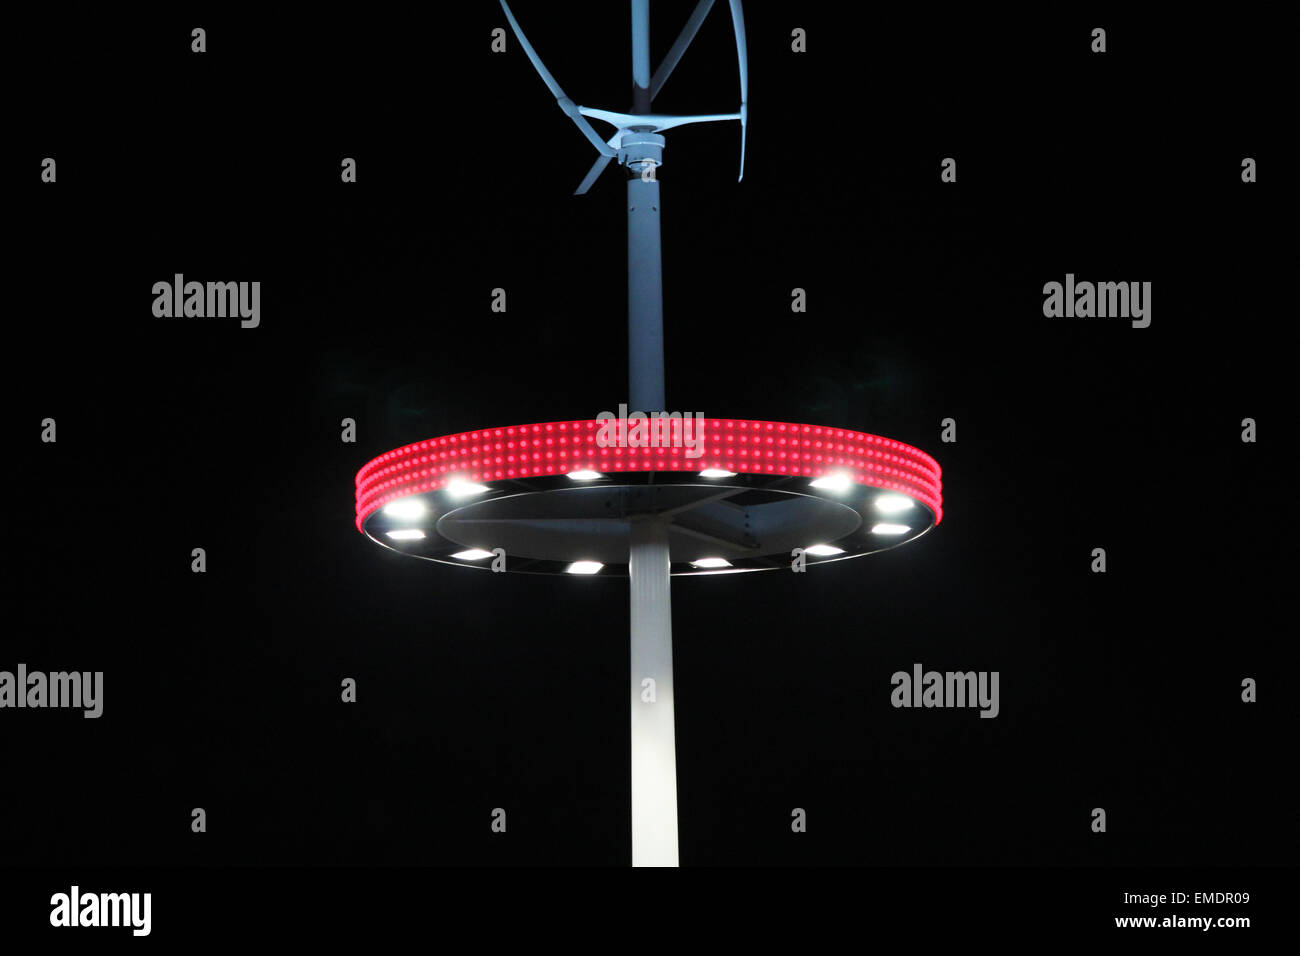 Wind turbine with red lights Stock Photo